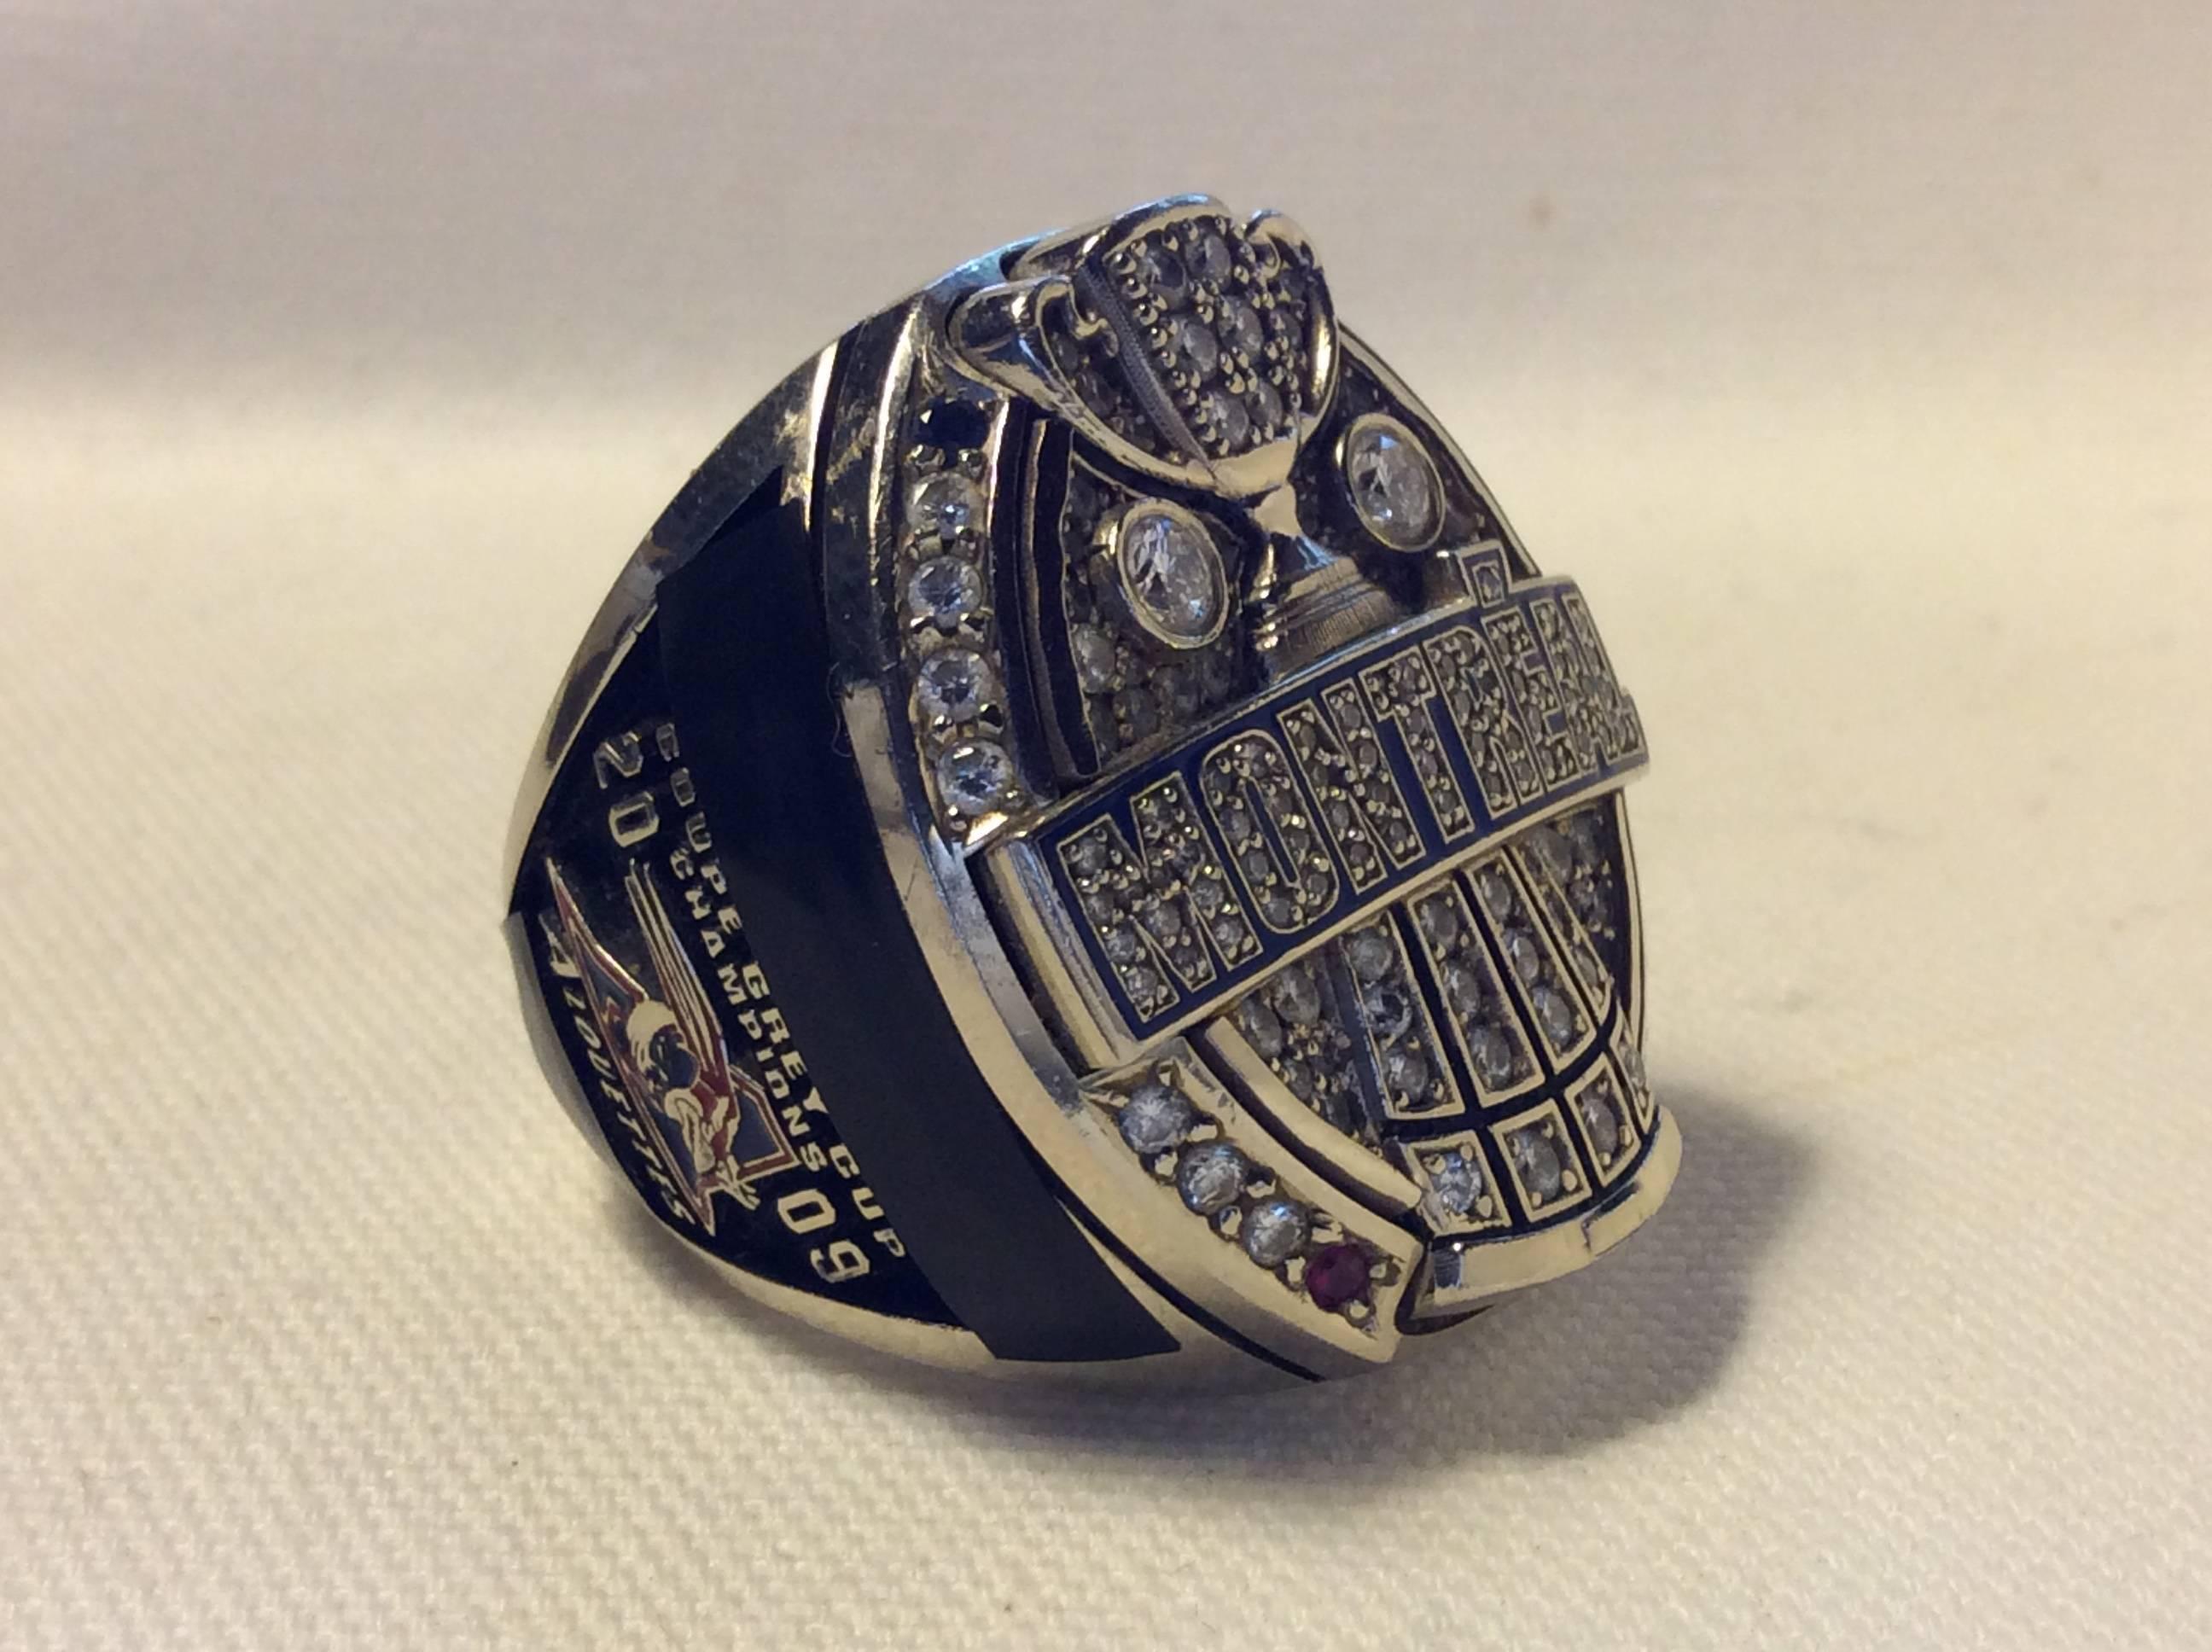 2009 Montreal Alouettes CFL Grey Cup Players Championship Ring For Sale 3